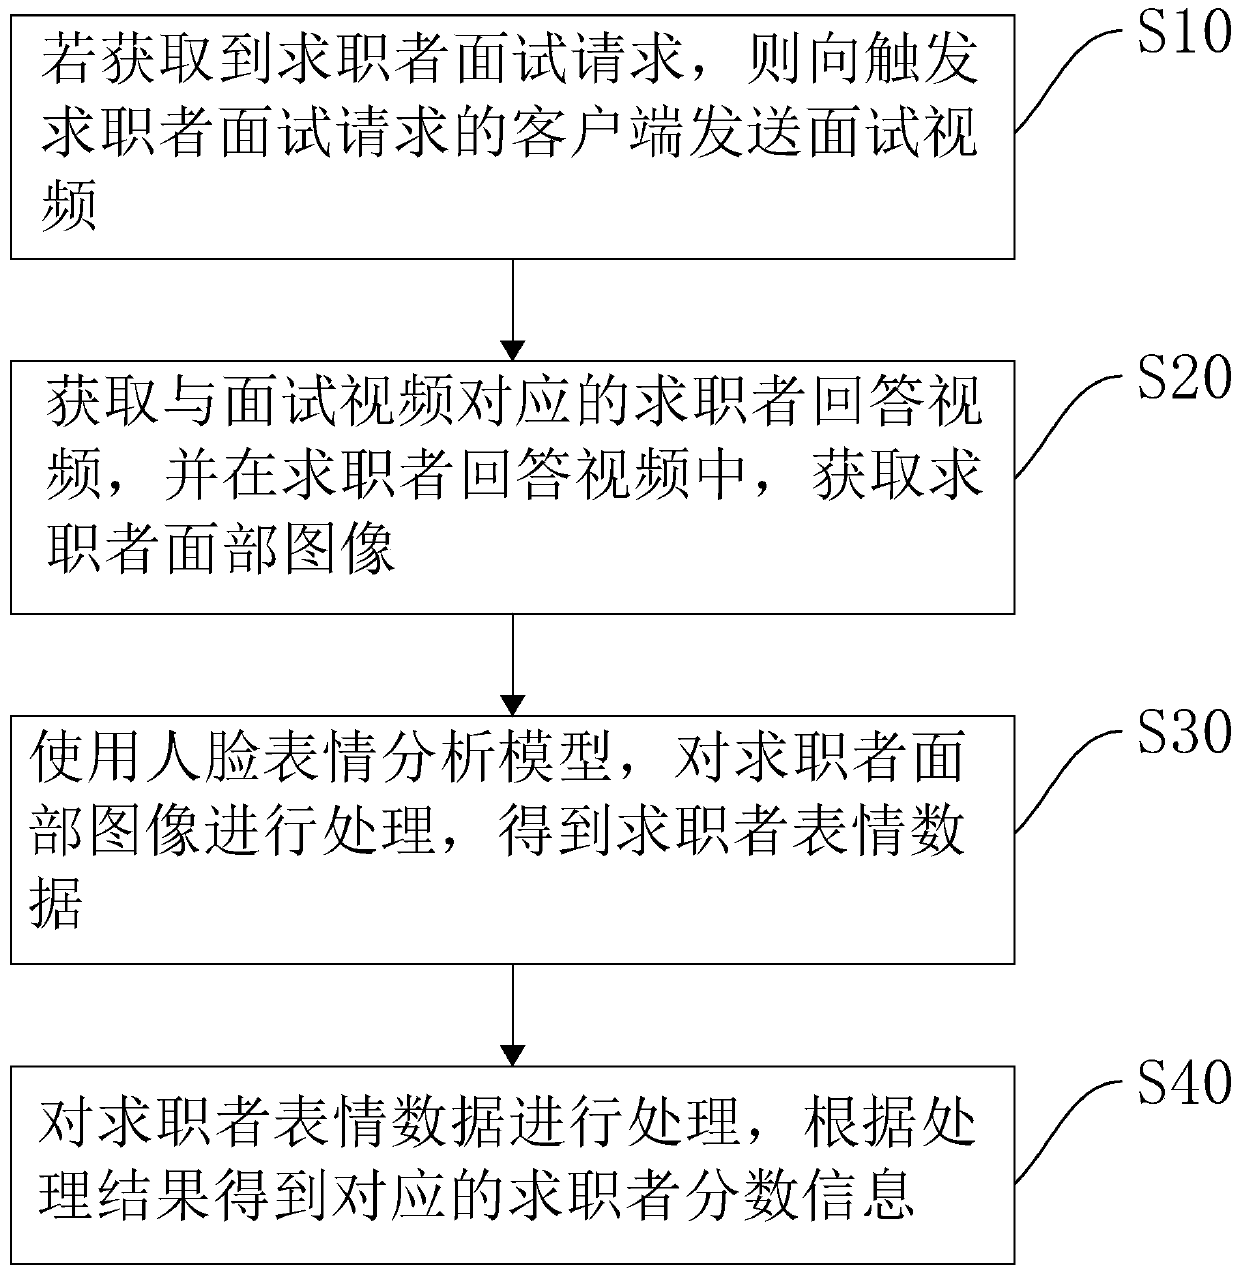 Video interview method and system based on expression analysis technology